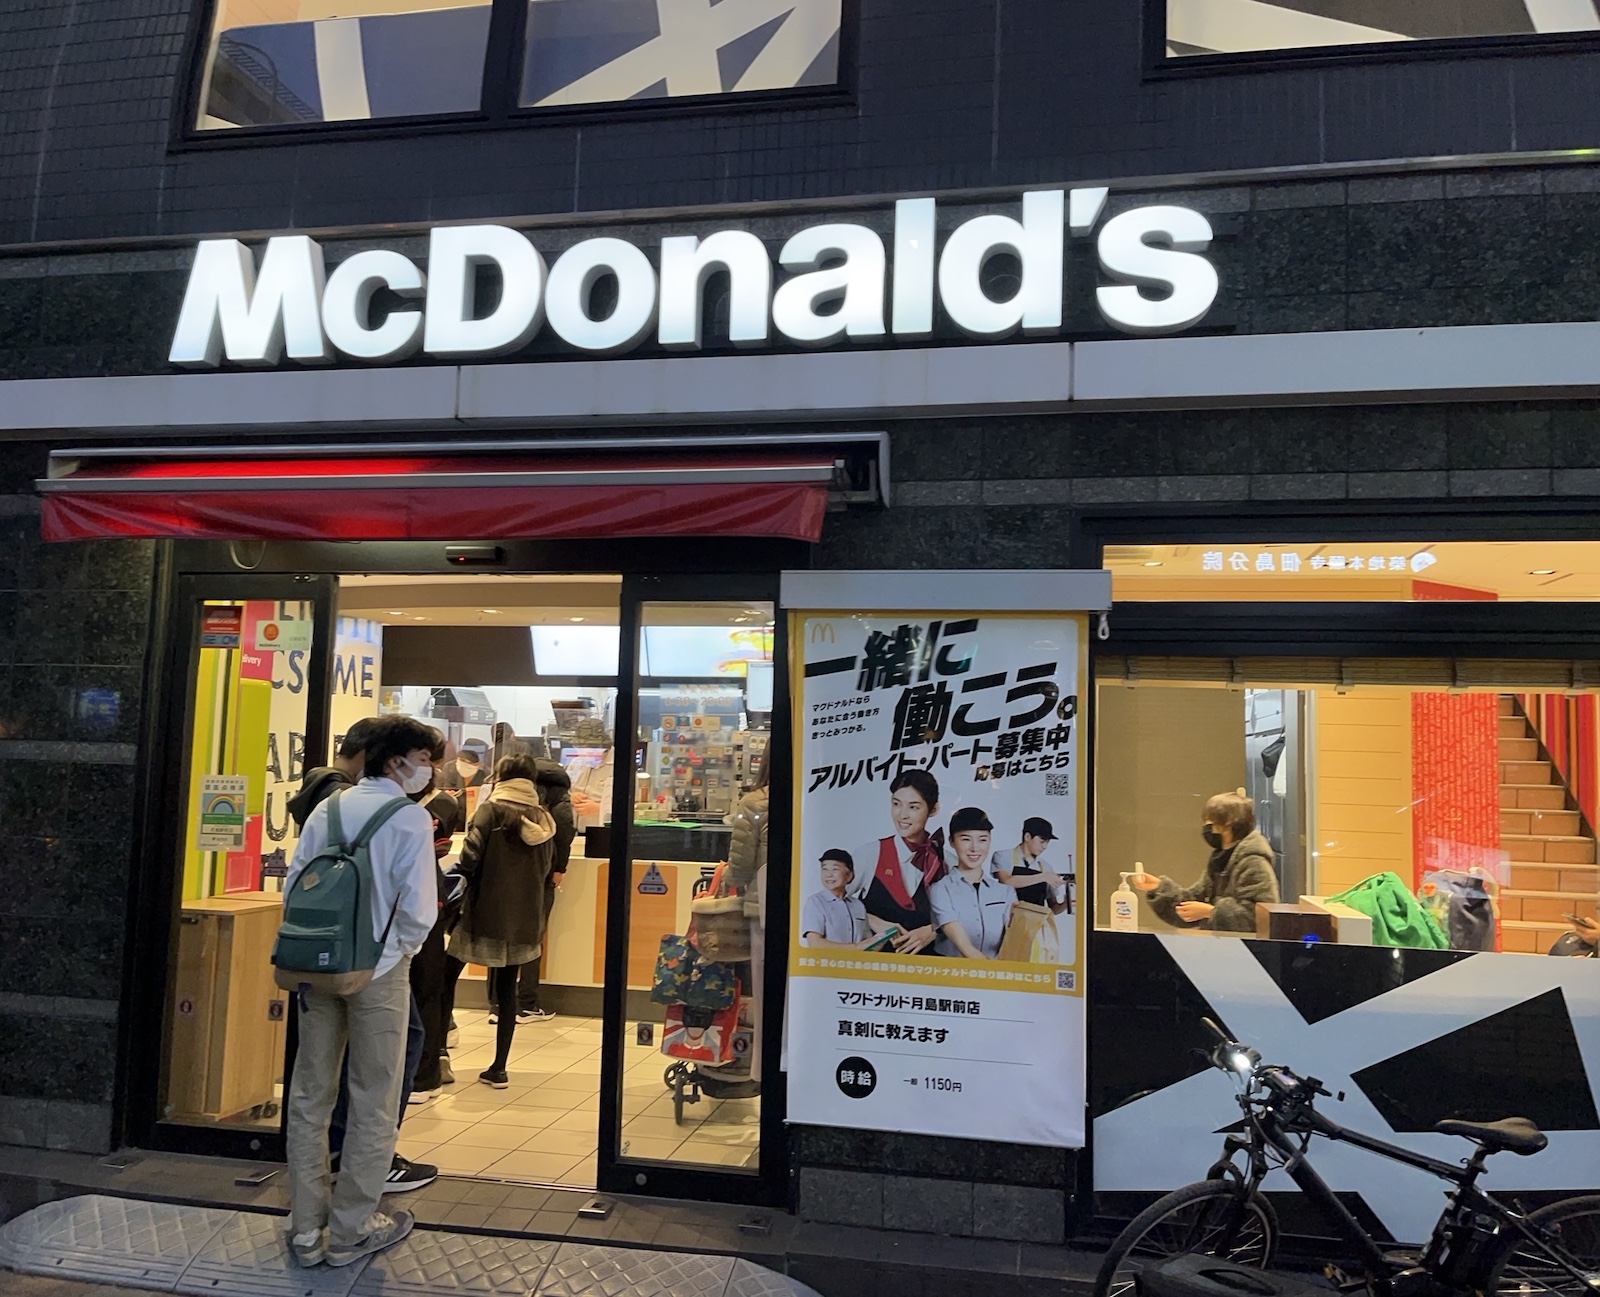 McDonald's Rolls Out $5 Meal Deal Amid Franchisee Concerns for Sustainable Pricing-